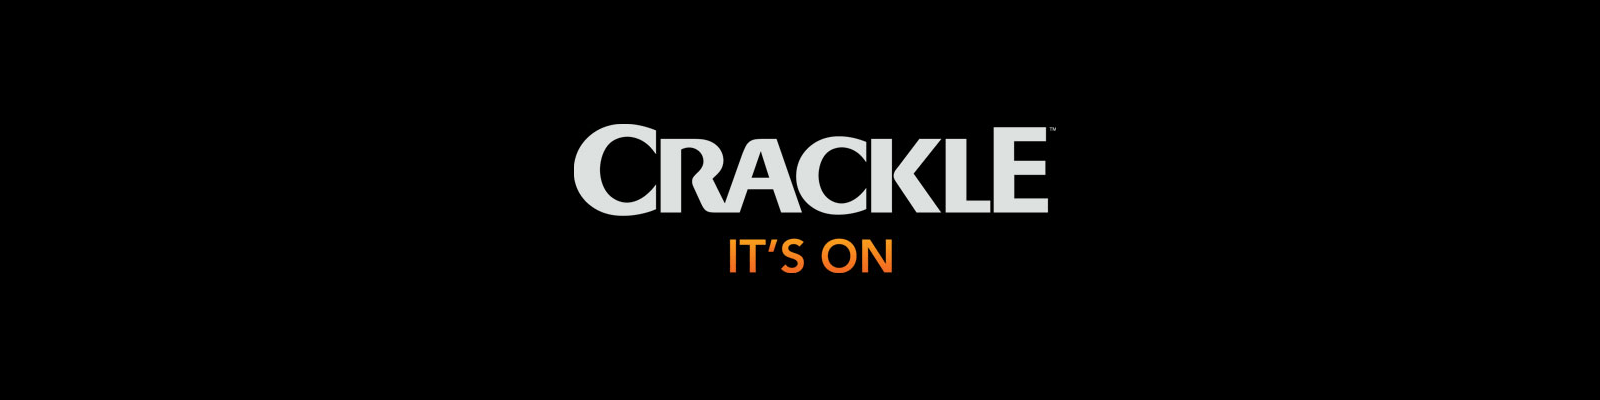 crackle app cost